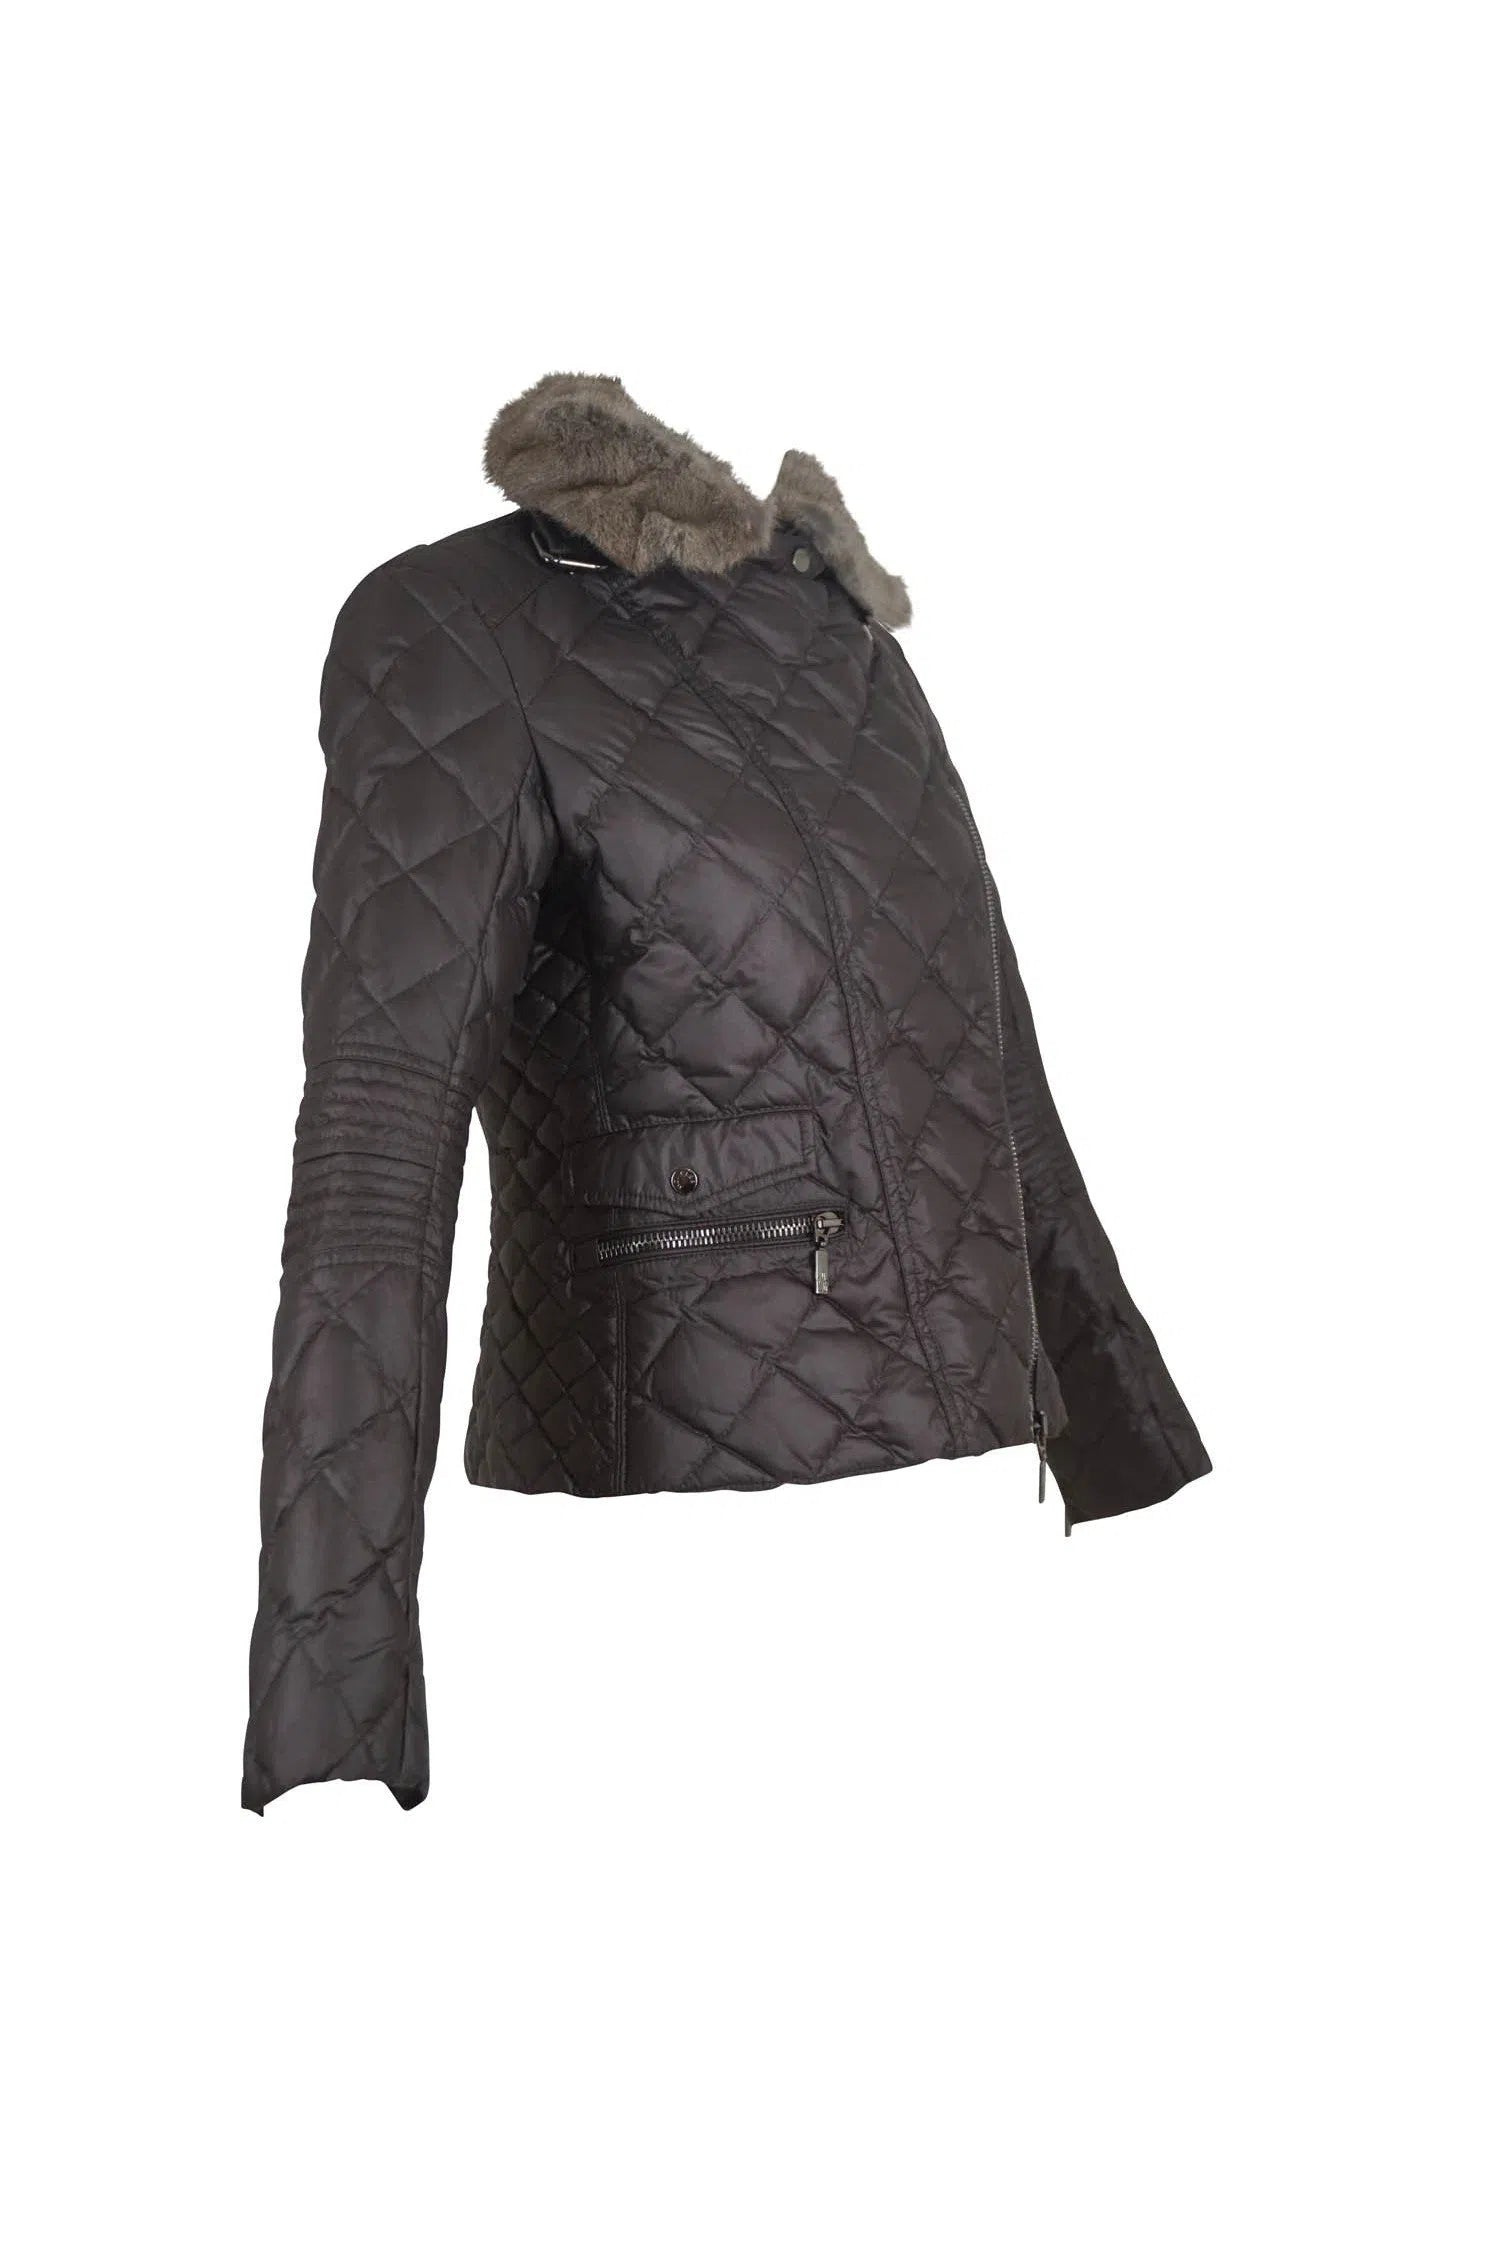 Moncler Chocolate Brown Quilted Down Moto Jacket sz Down quilted - Foxy Couture Carmel